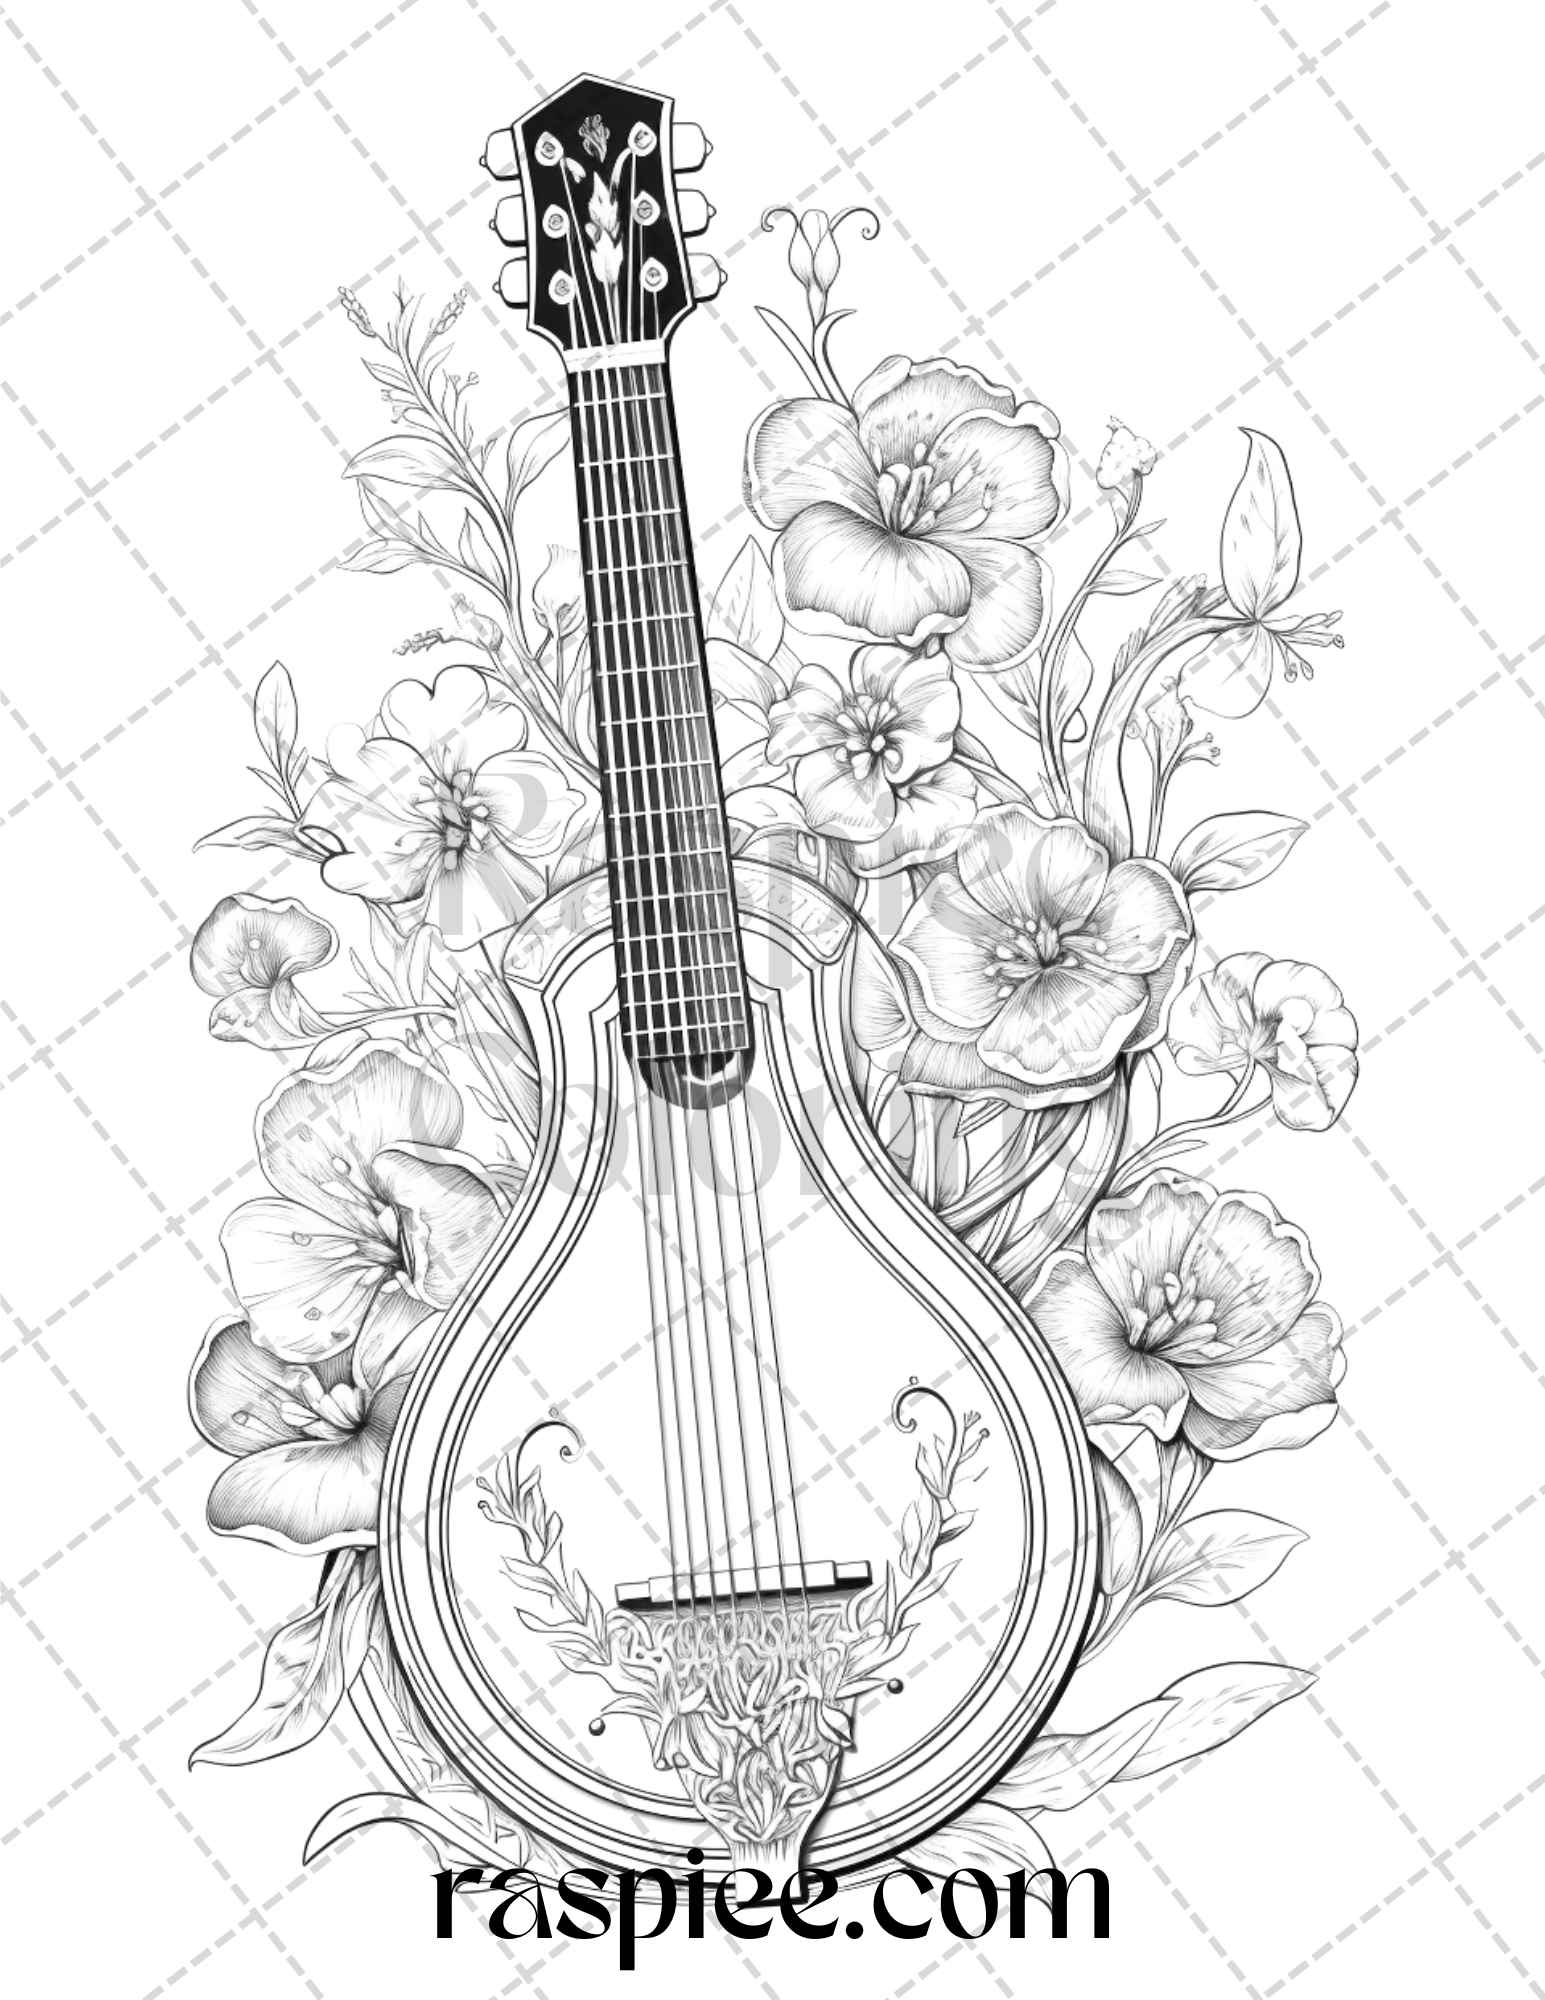 30 Musical Instrument Flower Grayscale Coloring Pages Printable for Adults, PDF File Instant Download - raspiee